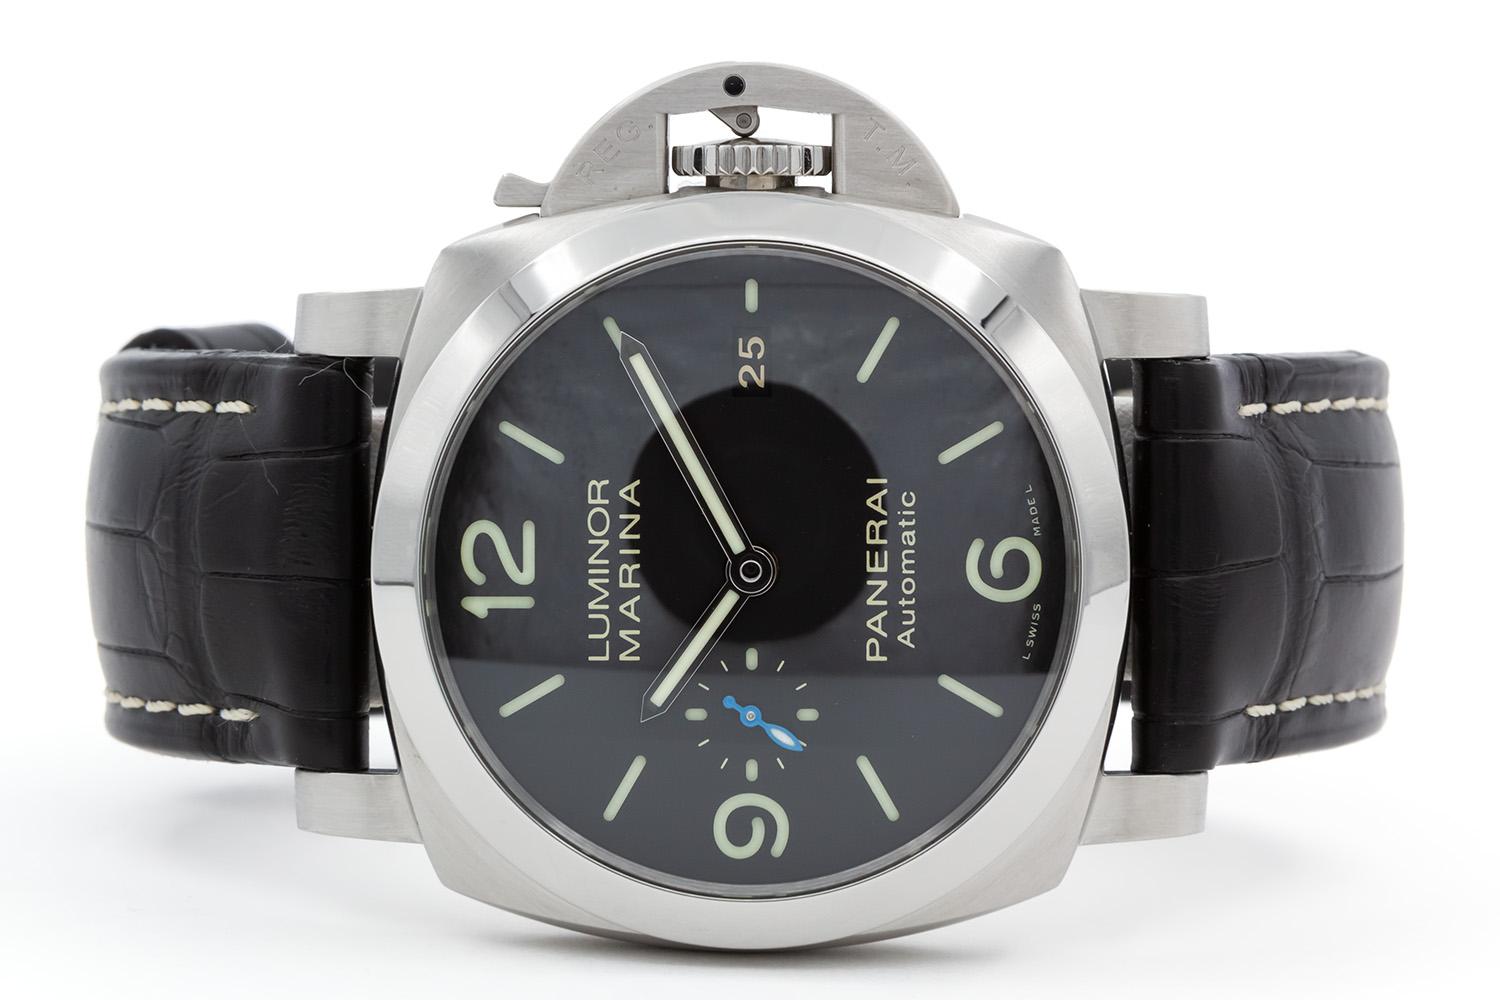 We are pleased to offer this 2020 Stainless Steel Panerai Luminor Marina 1950 3 Day PAM01312. The Luminor Marina, one of the world’s best-loved Panerai models, is updated by the P.9010 automatic movement, with a power reserve of three days. High